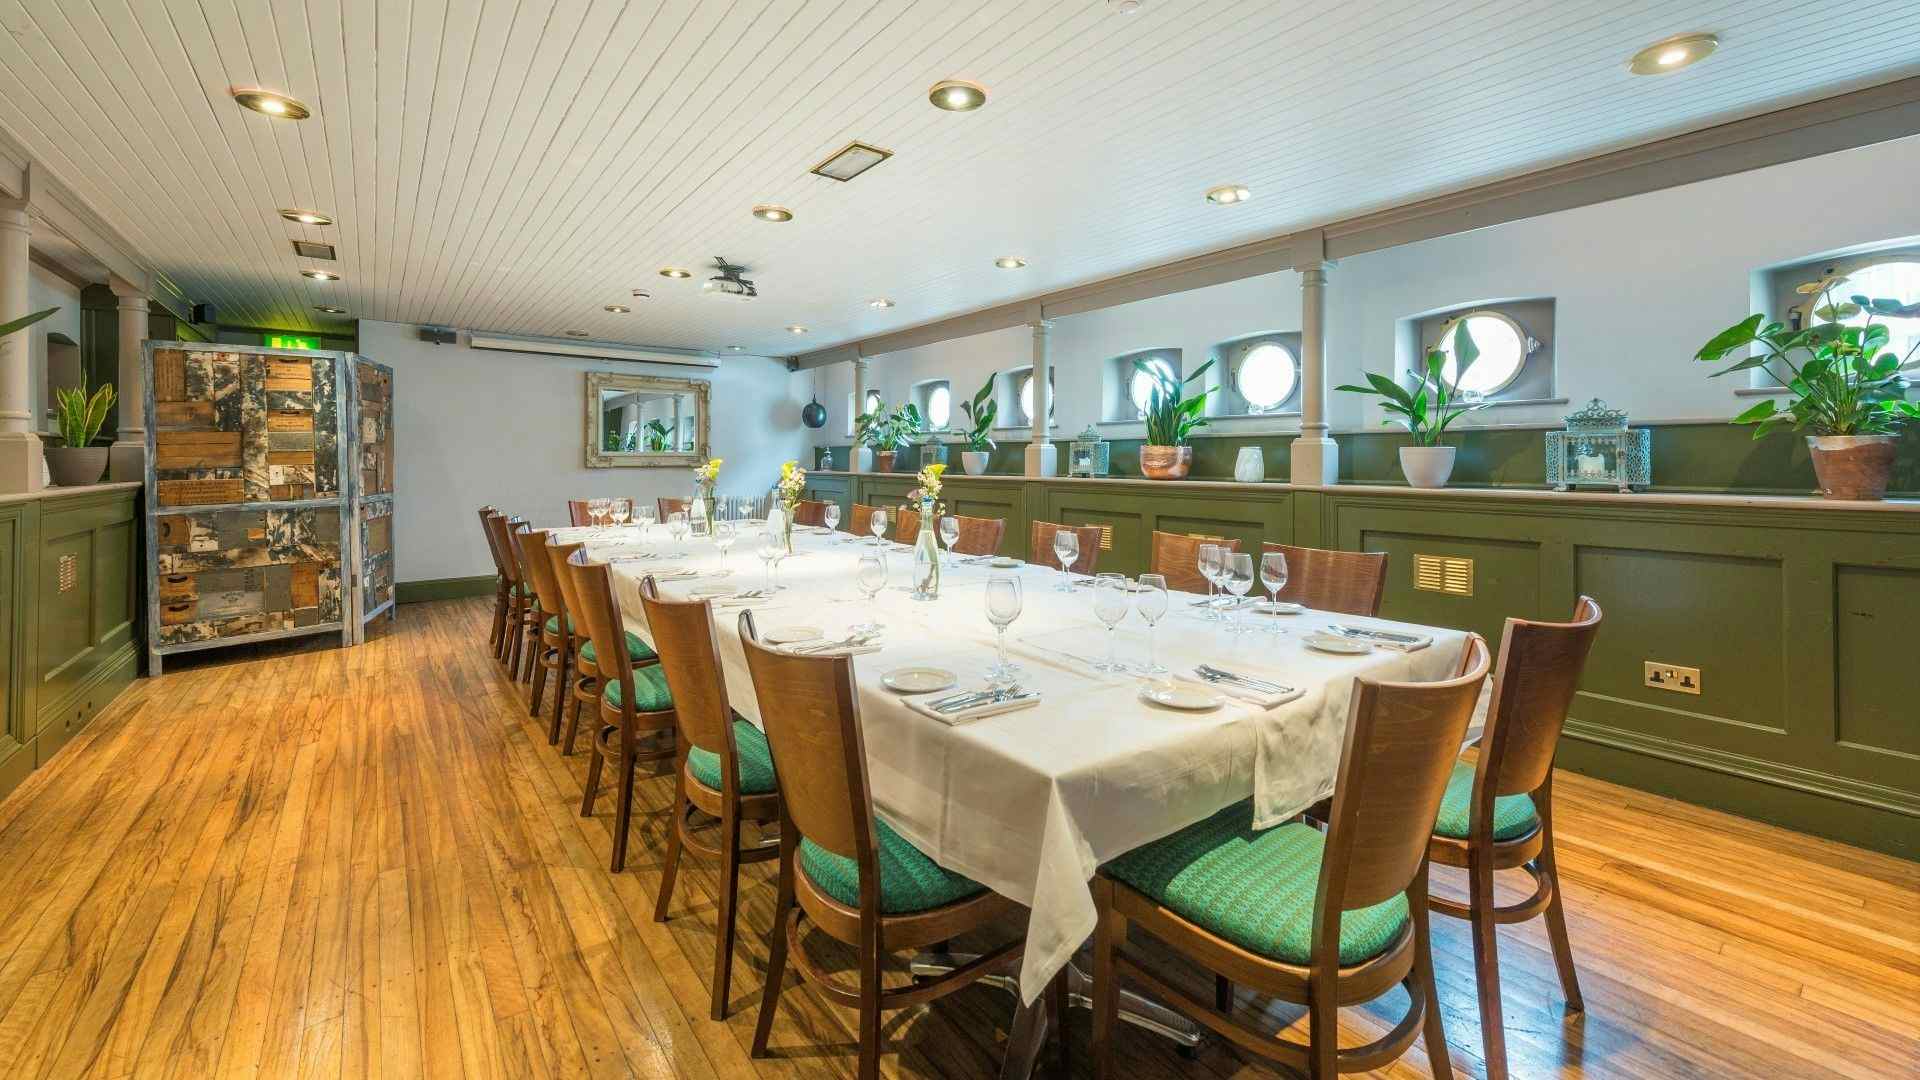 The Lower Deck - Private Dining and Meeting Room, Glassboat Restaurant